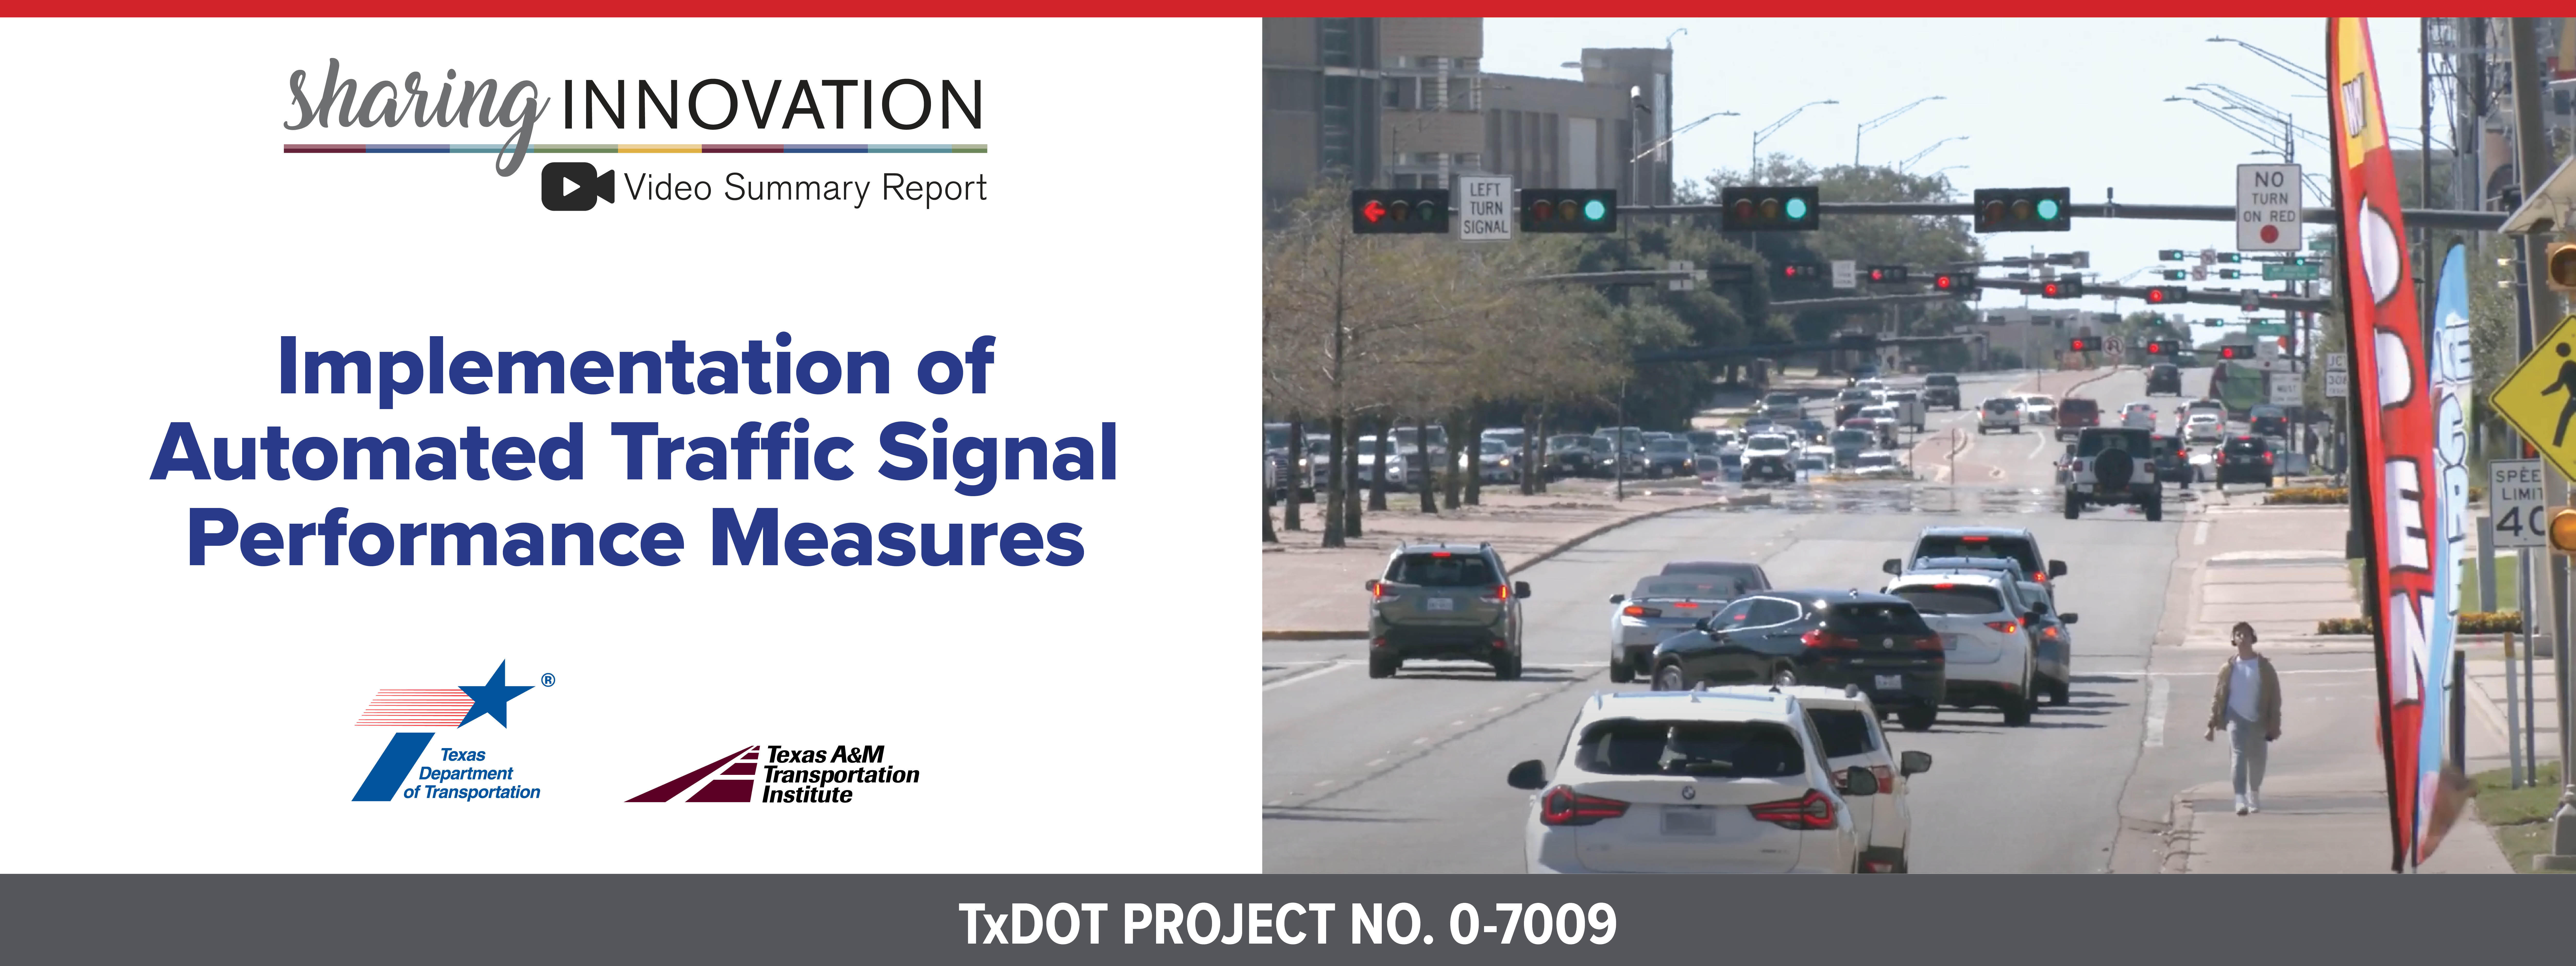 Sharing Innovation Video Summary Report: Implementation of Automated Traffic Signal Performance Measures